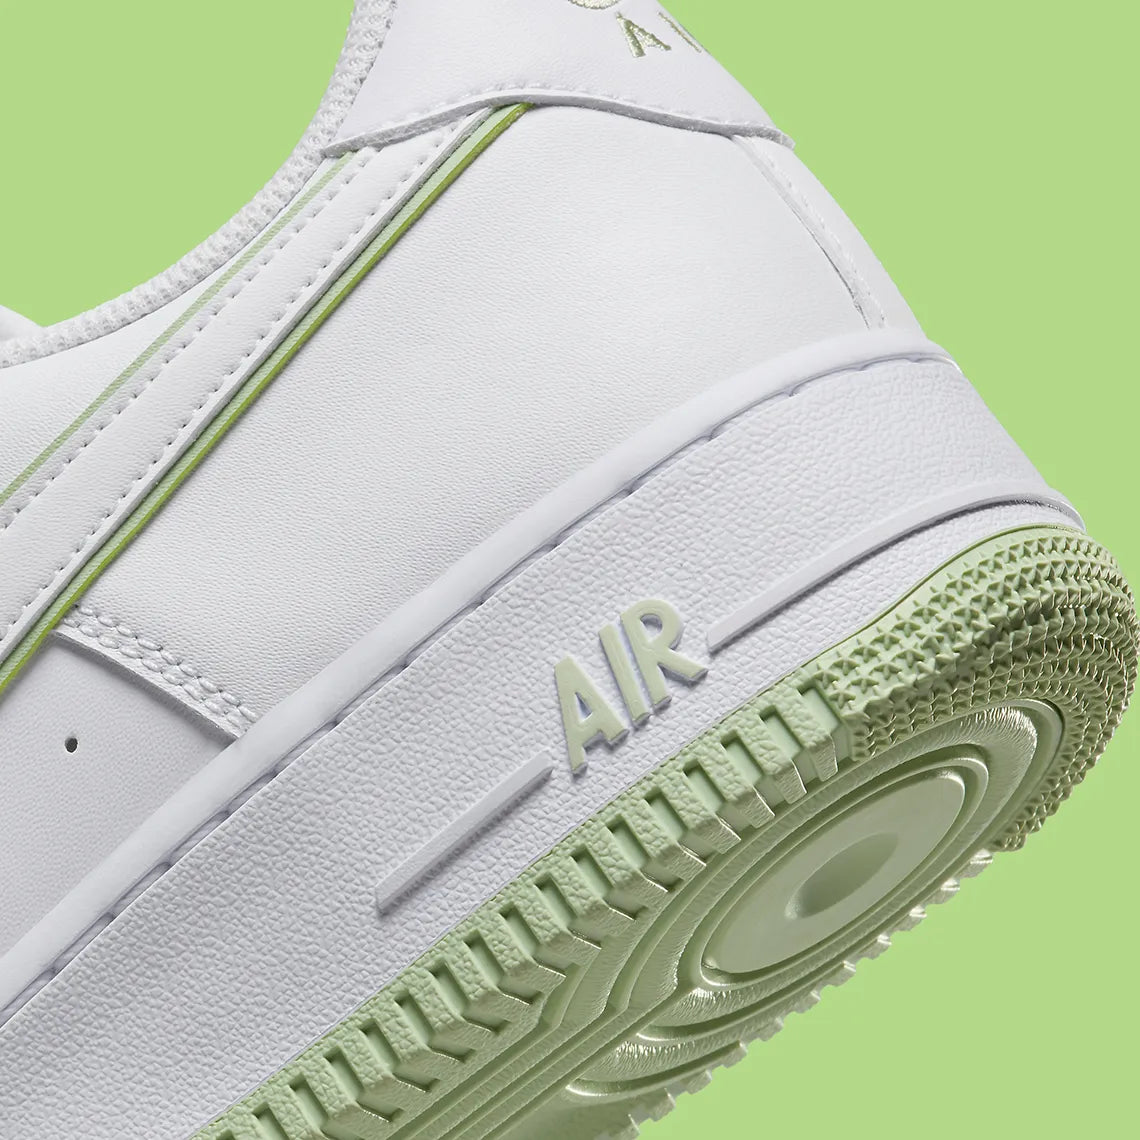 Nike Air Force 1 Low '07 White Honeydew